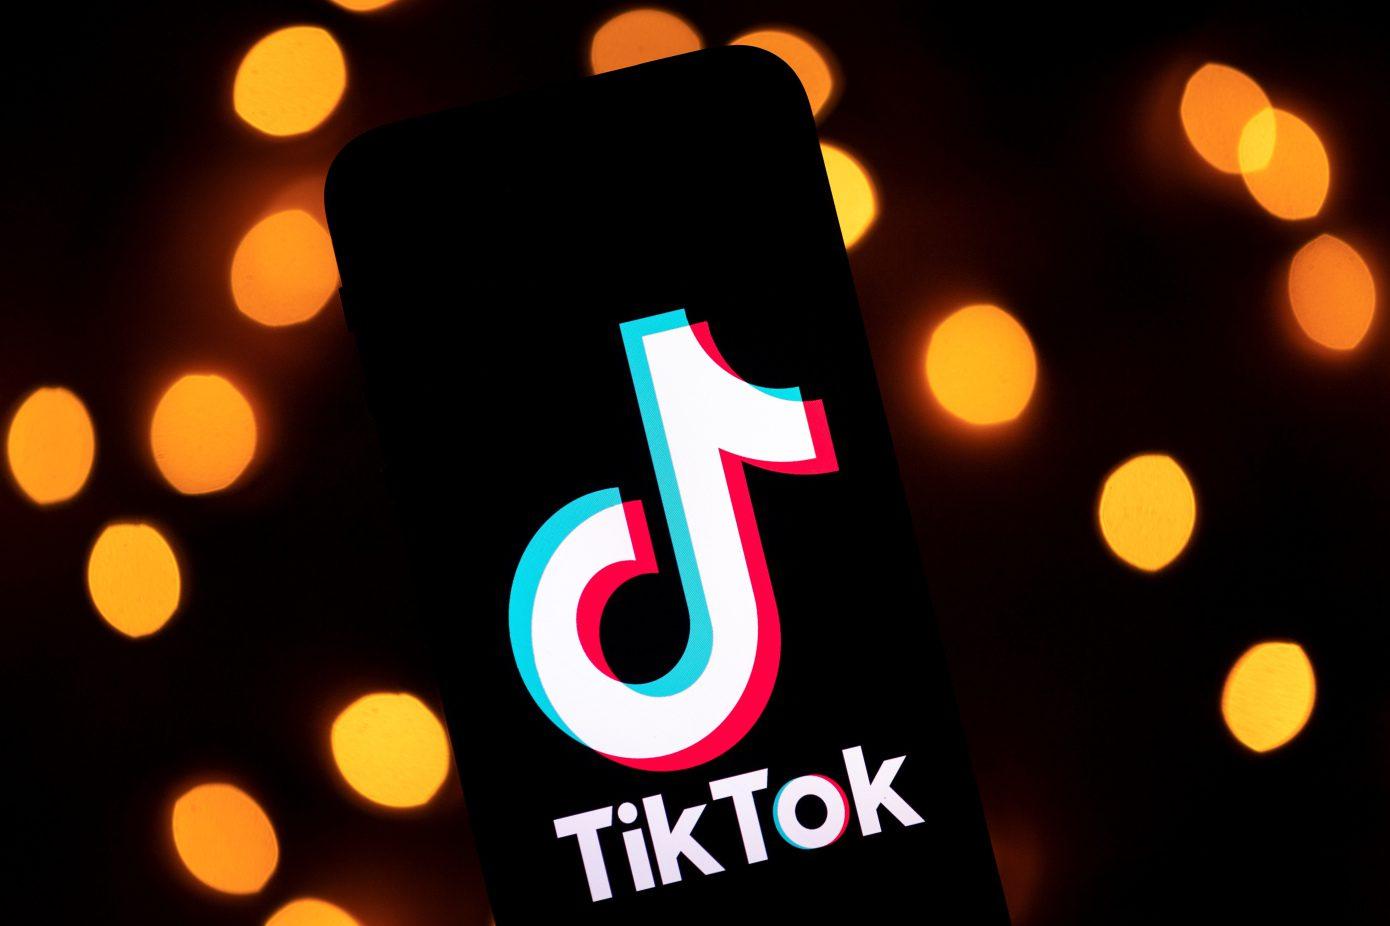 Image: How much is a rose on TikTok